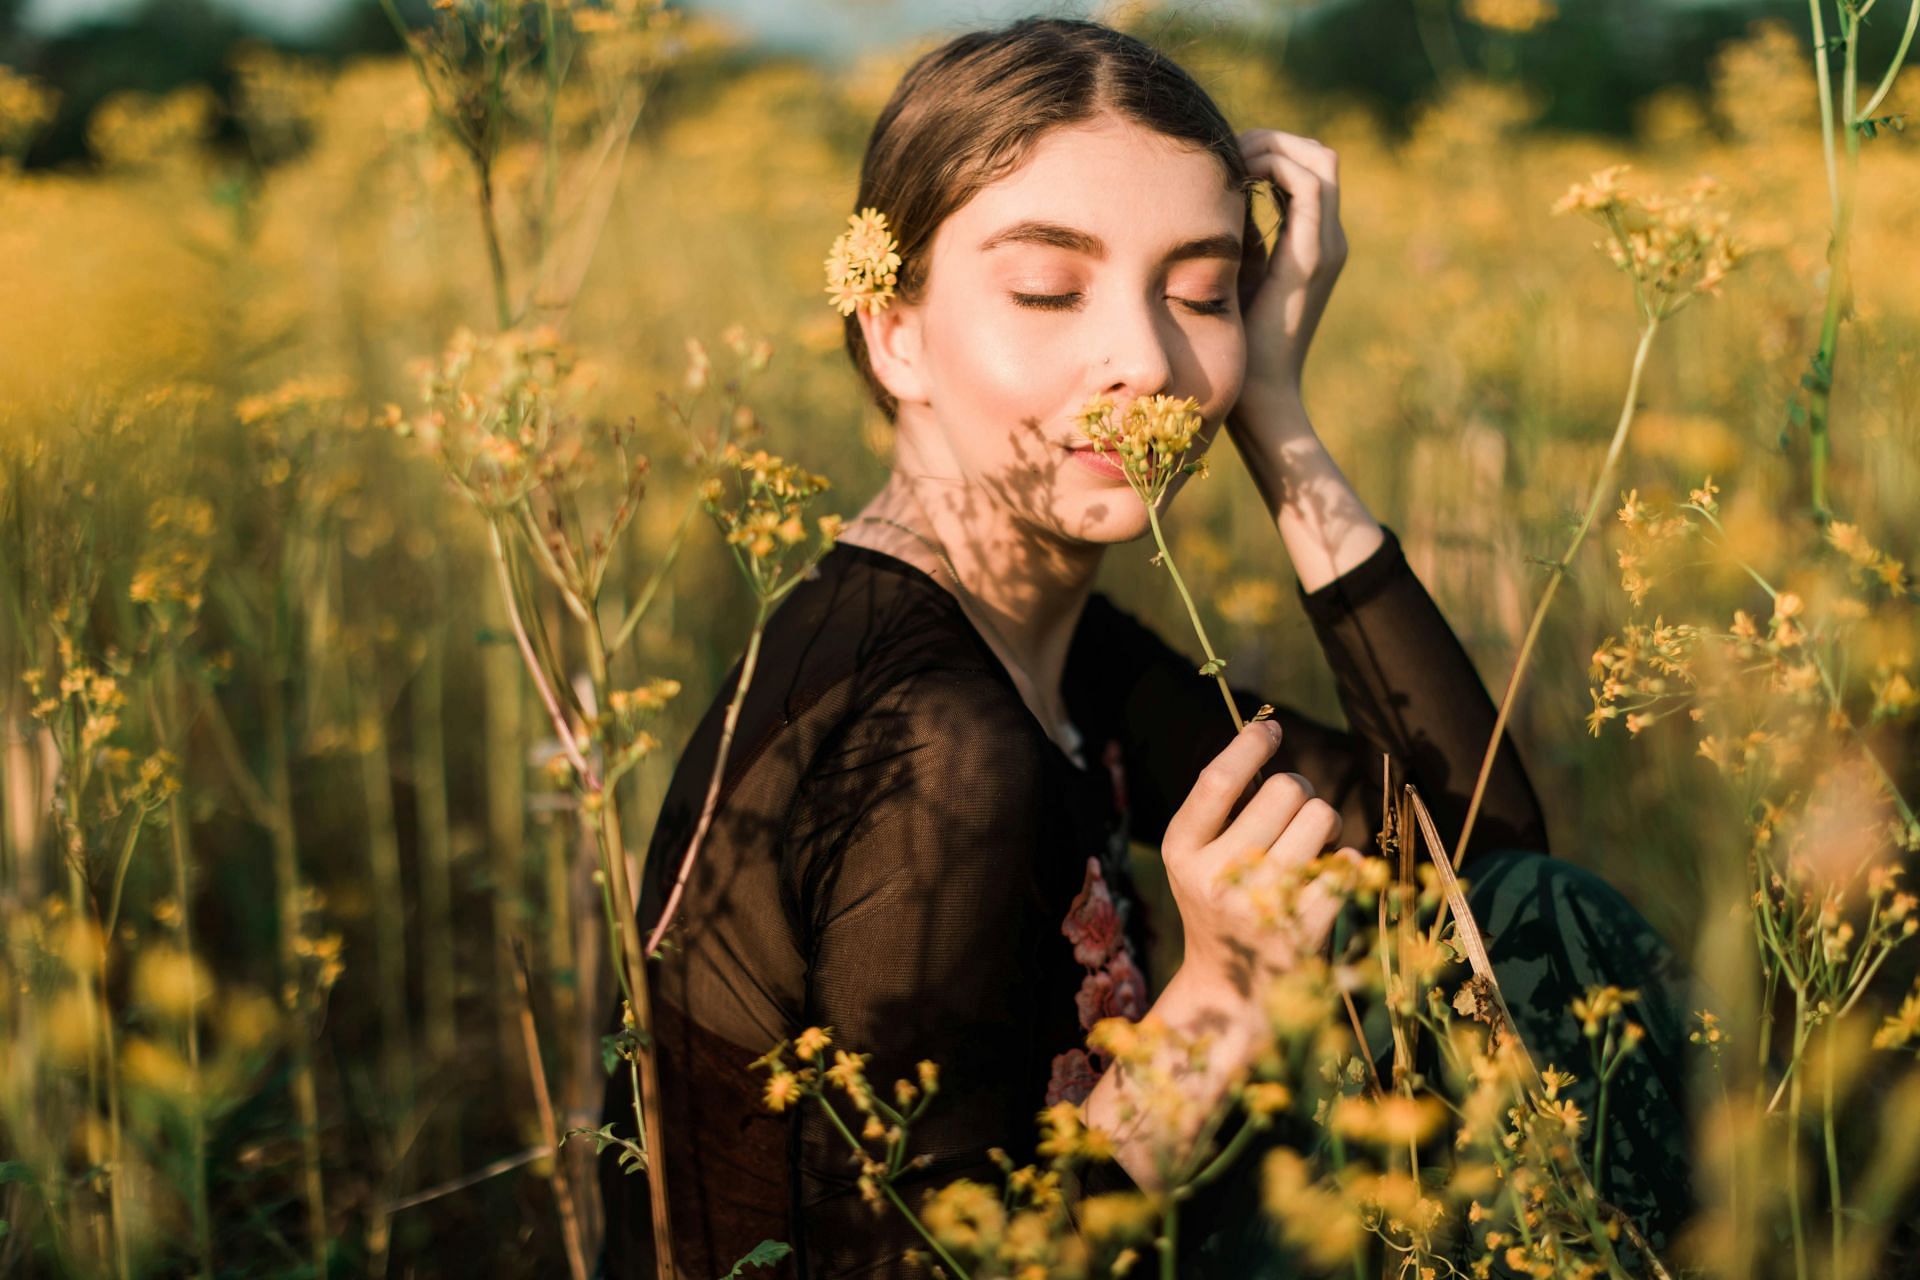 Can scent therapy play a role in mitigating symptoms of depression? (Image via Pexels/ Leah Newhouse)